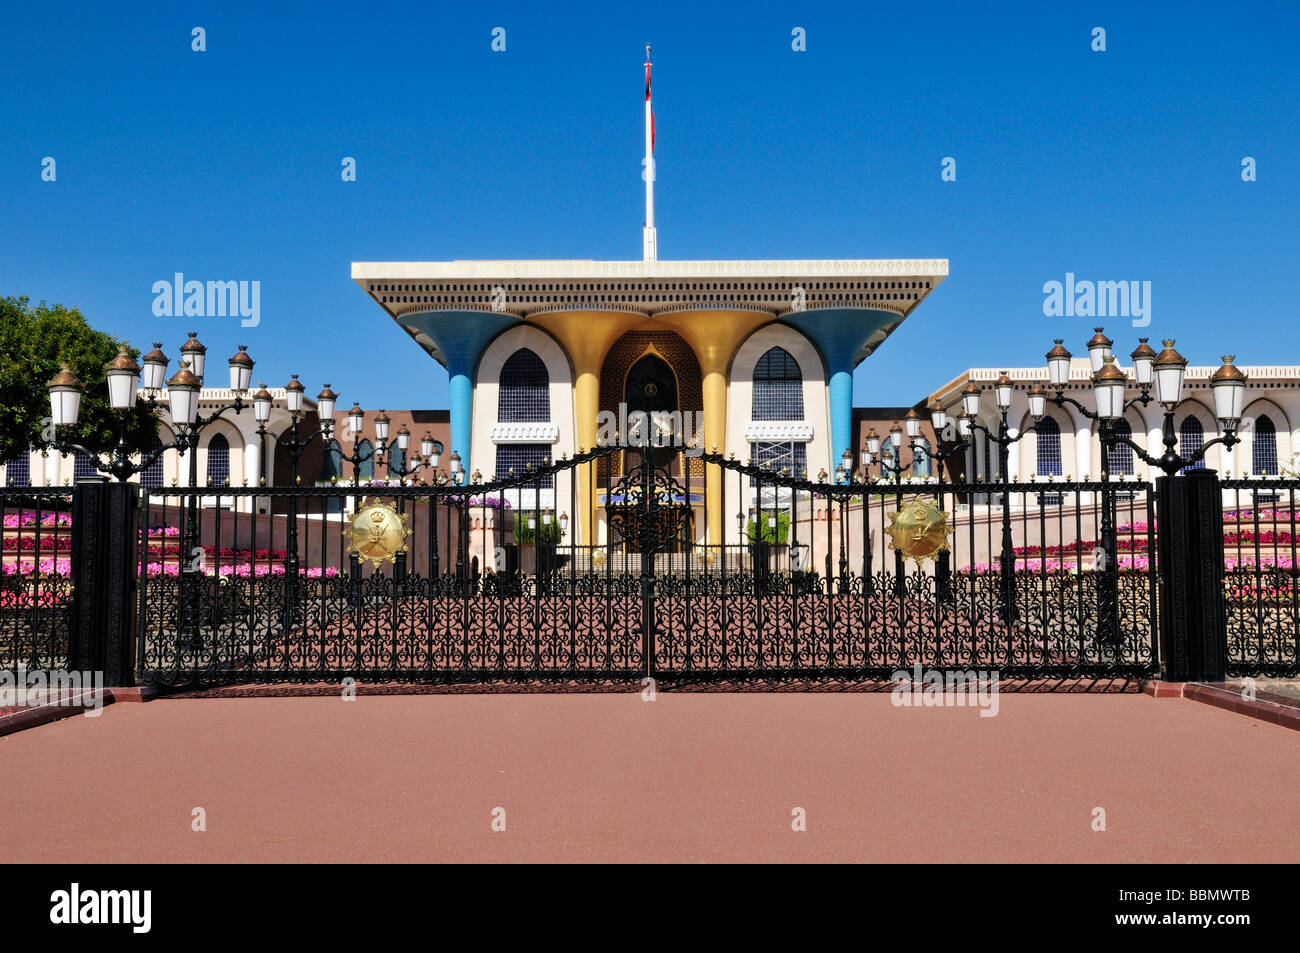 Al Alam Palace of Sultan Qaboos, Muscat, Sultanate of Oman, Arabia, Middle East Stock Photo